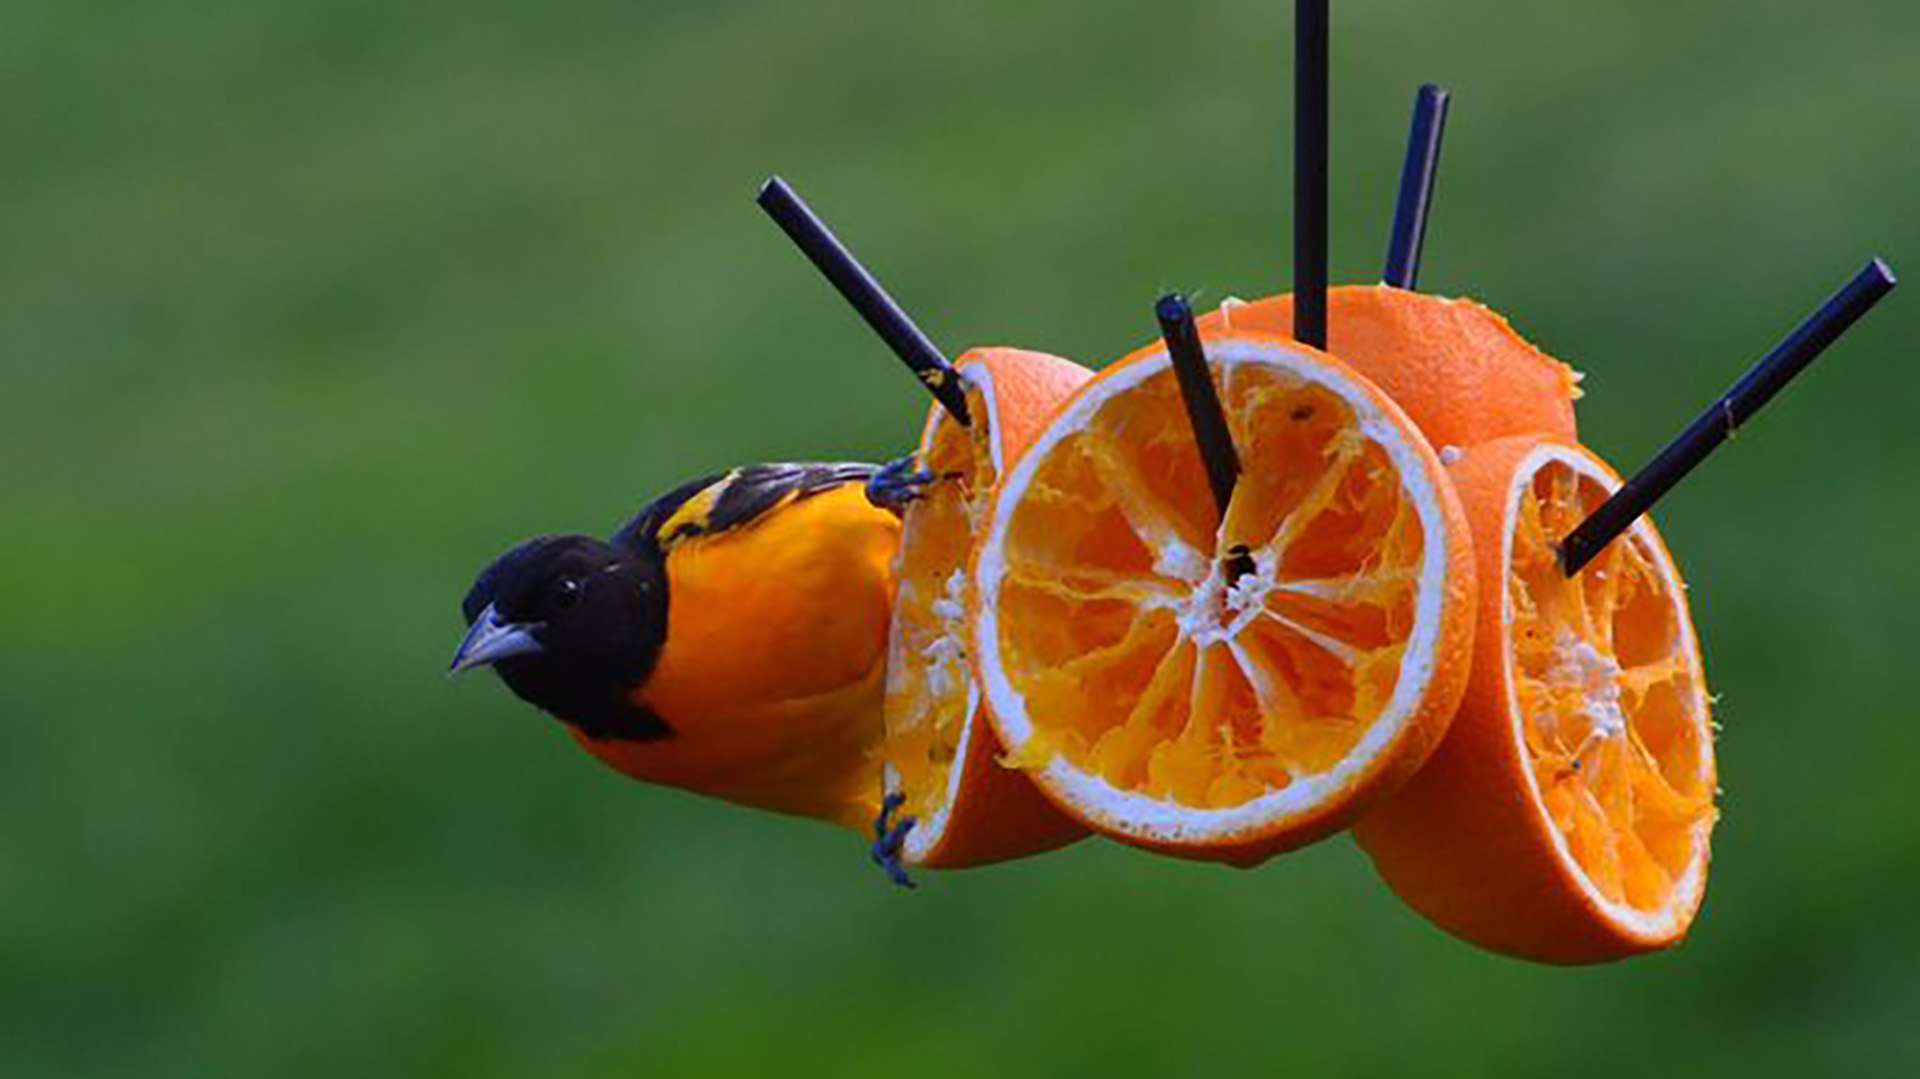 Oriole Bird Feeders made from oranges